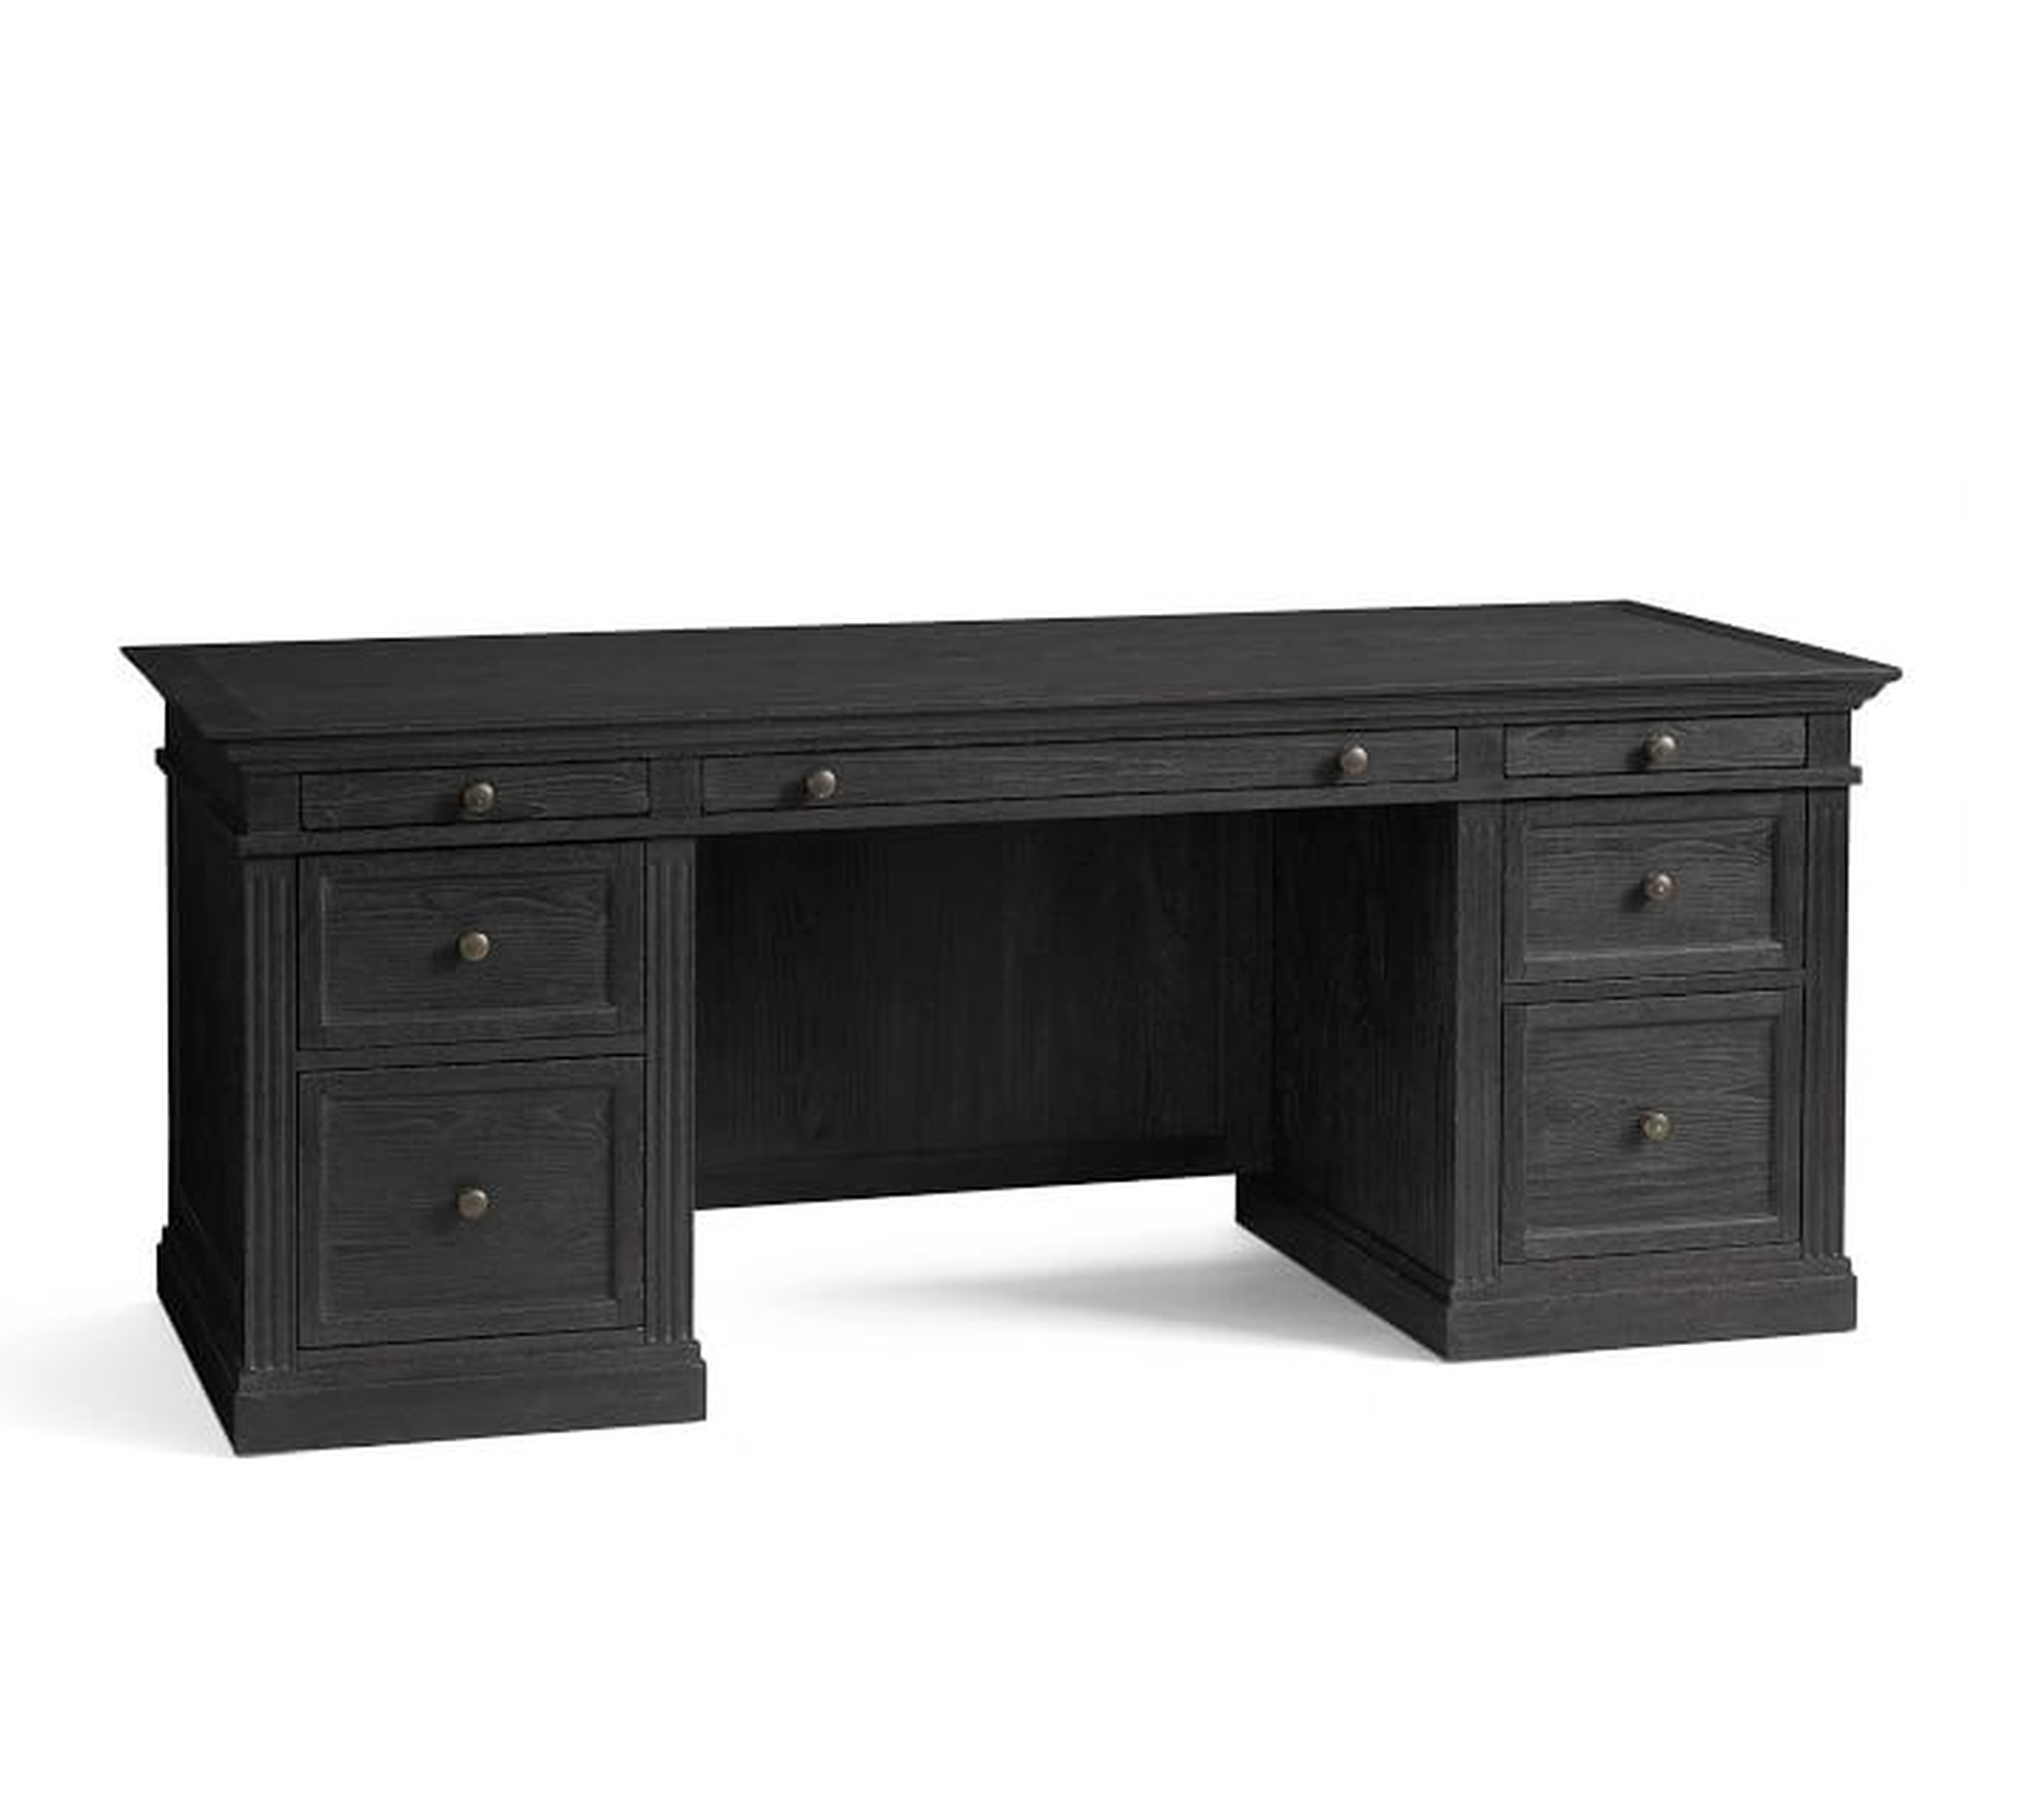 Livingston 75" Executive Desk with Drawers - Pottery Barn